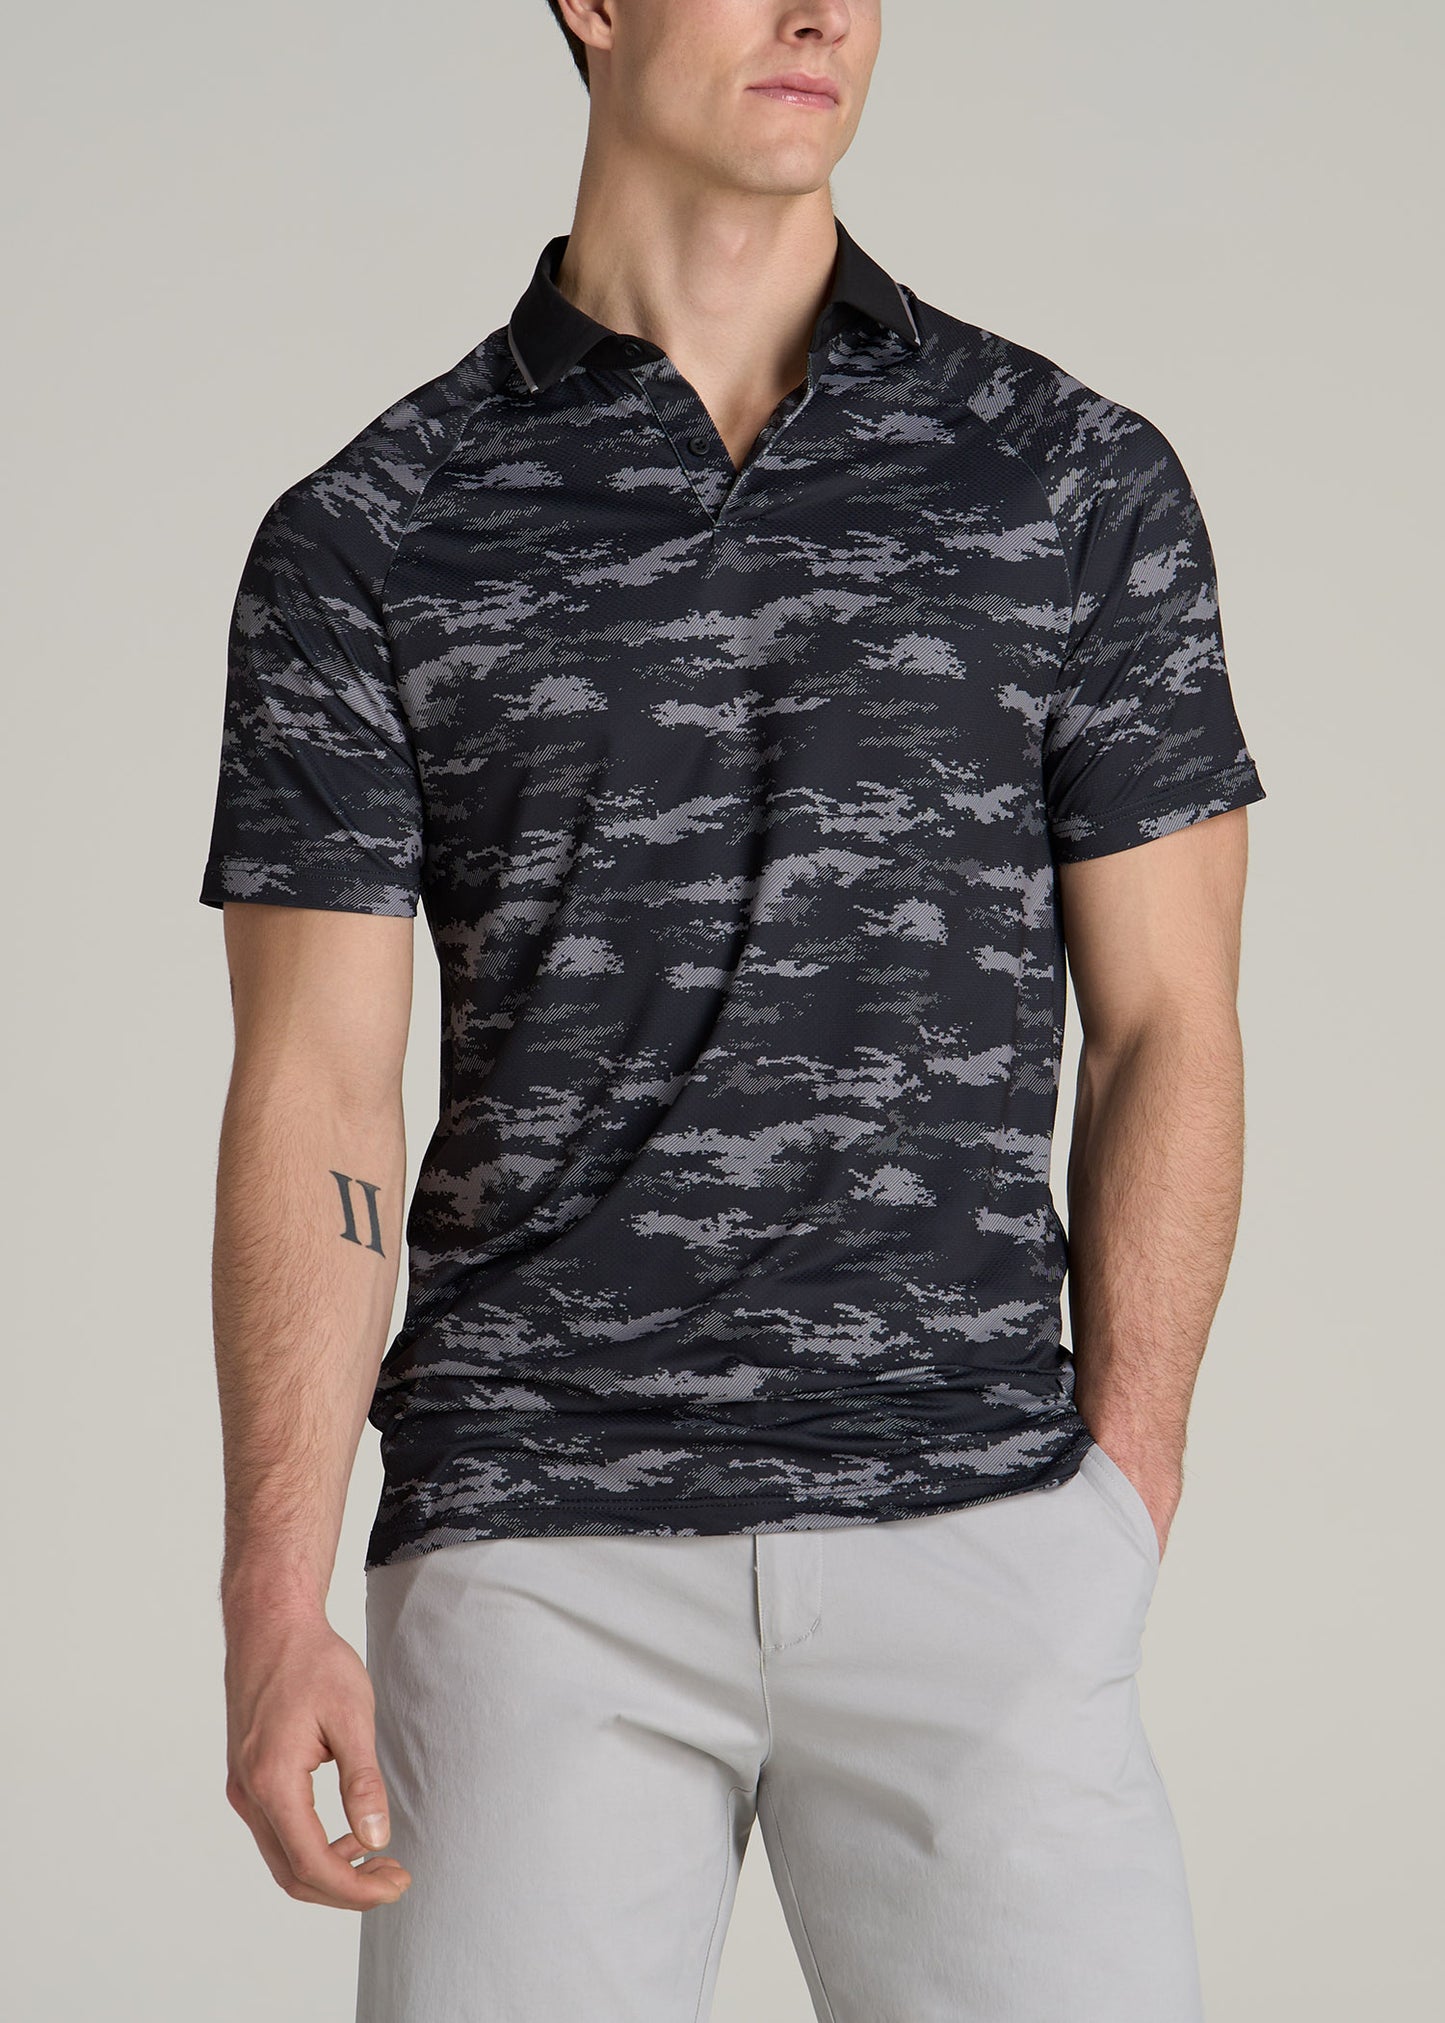 A tall man wearing American Tall's Contrast Collar A.T. Performance Print Golf Tall Men's Polo Shirt in Black and Grey Camo.